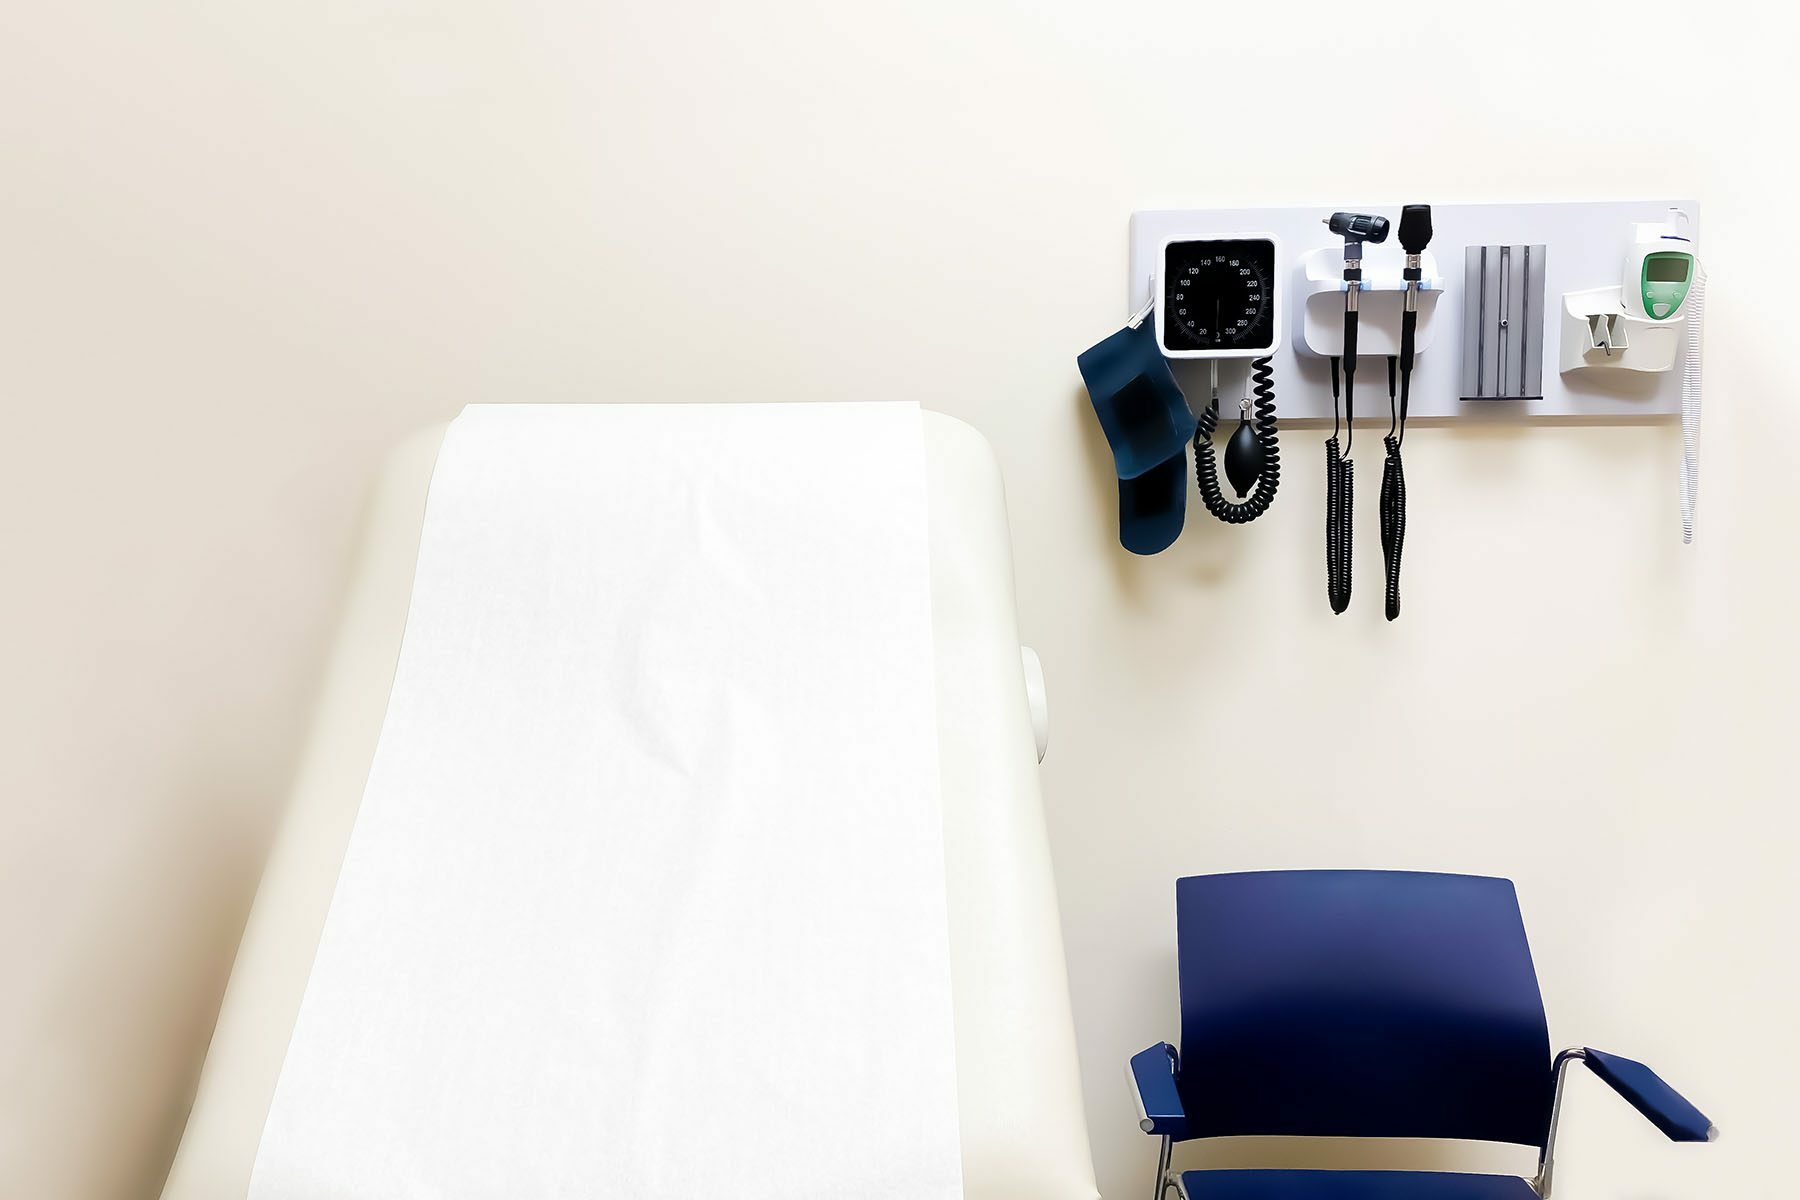 wall-mounted medical diagnostic equipment beside standard patient examination chair